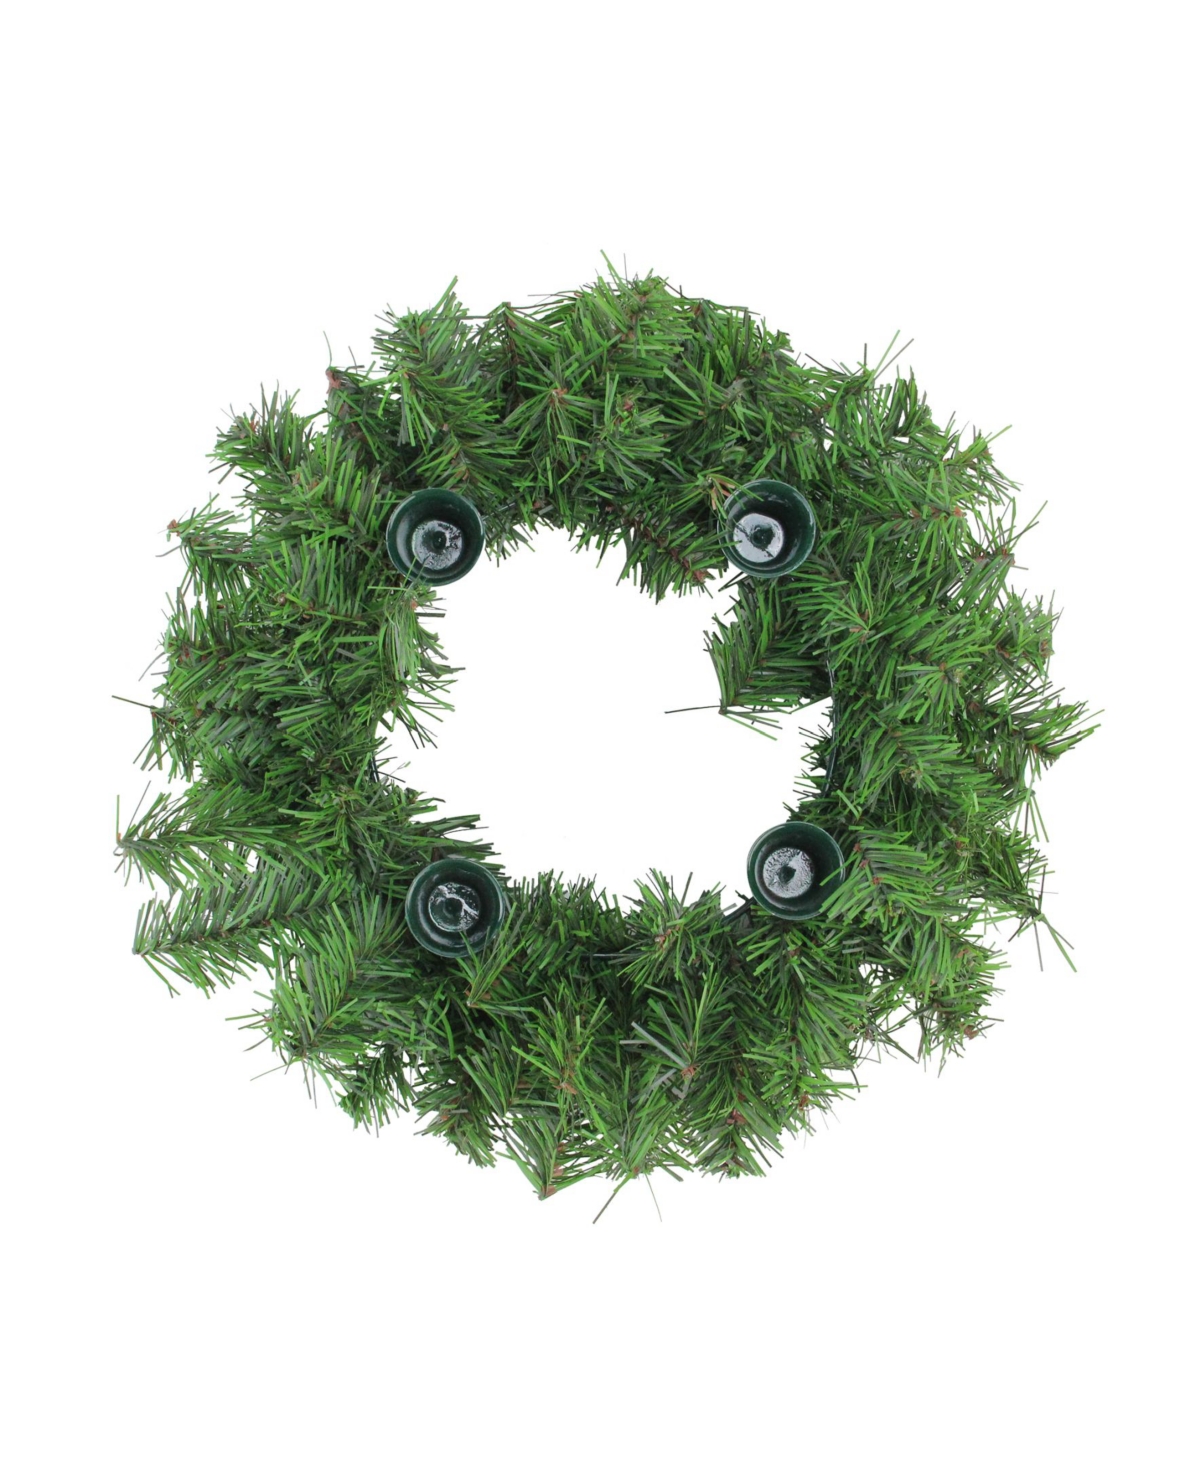 12" Two-Tone Pine Artificial Christmas Advent Wreath - Holds 4 Taper Candles - Green